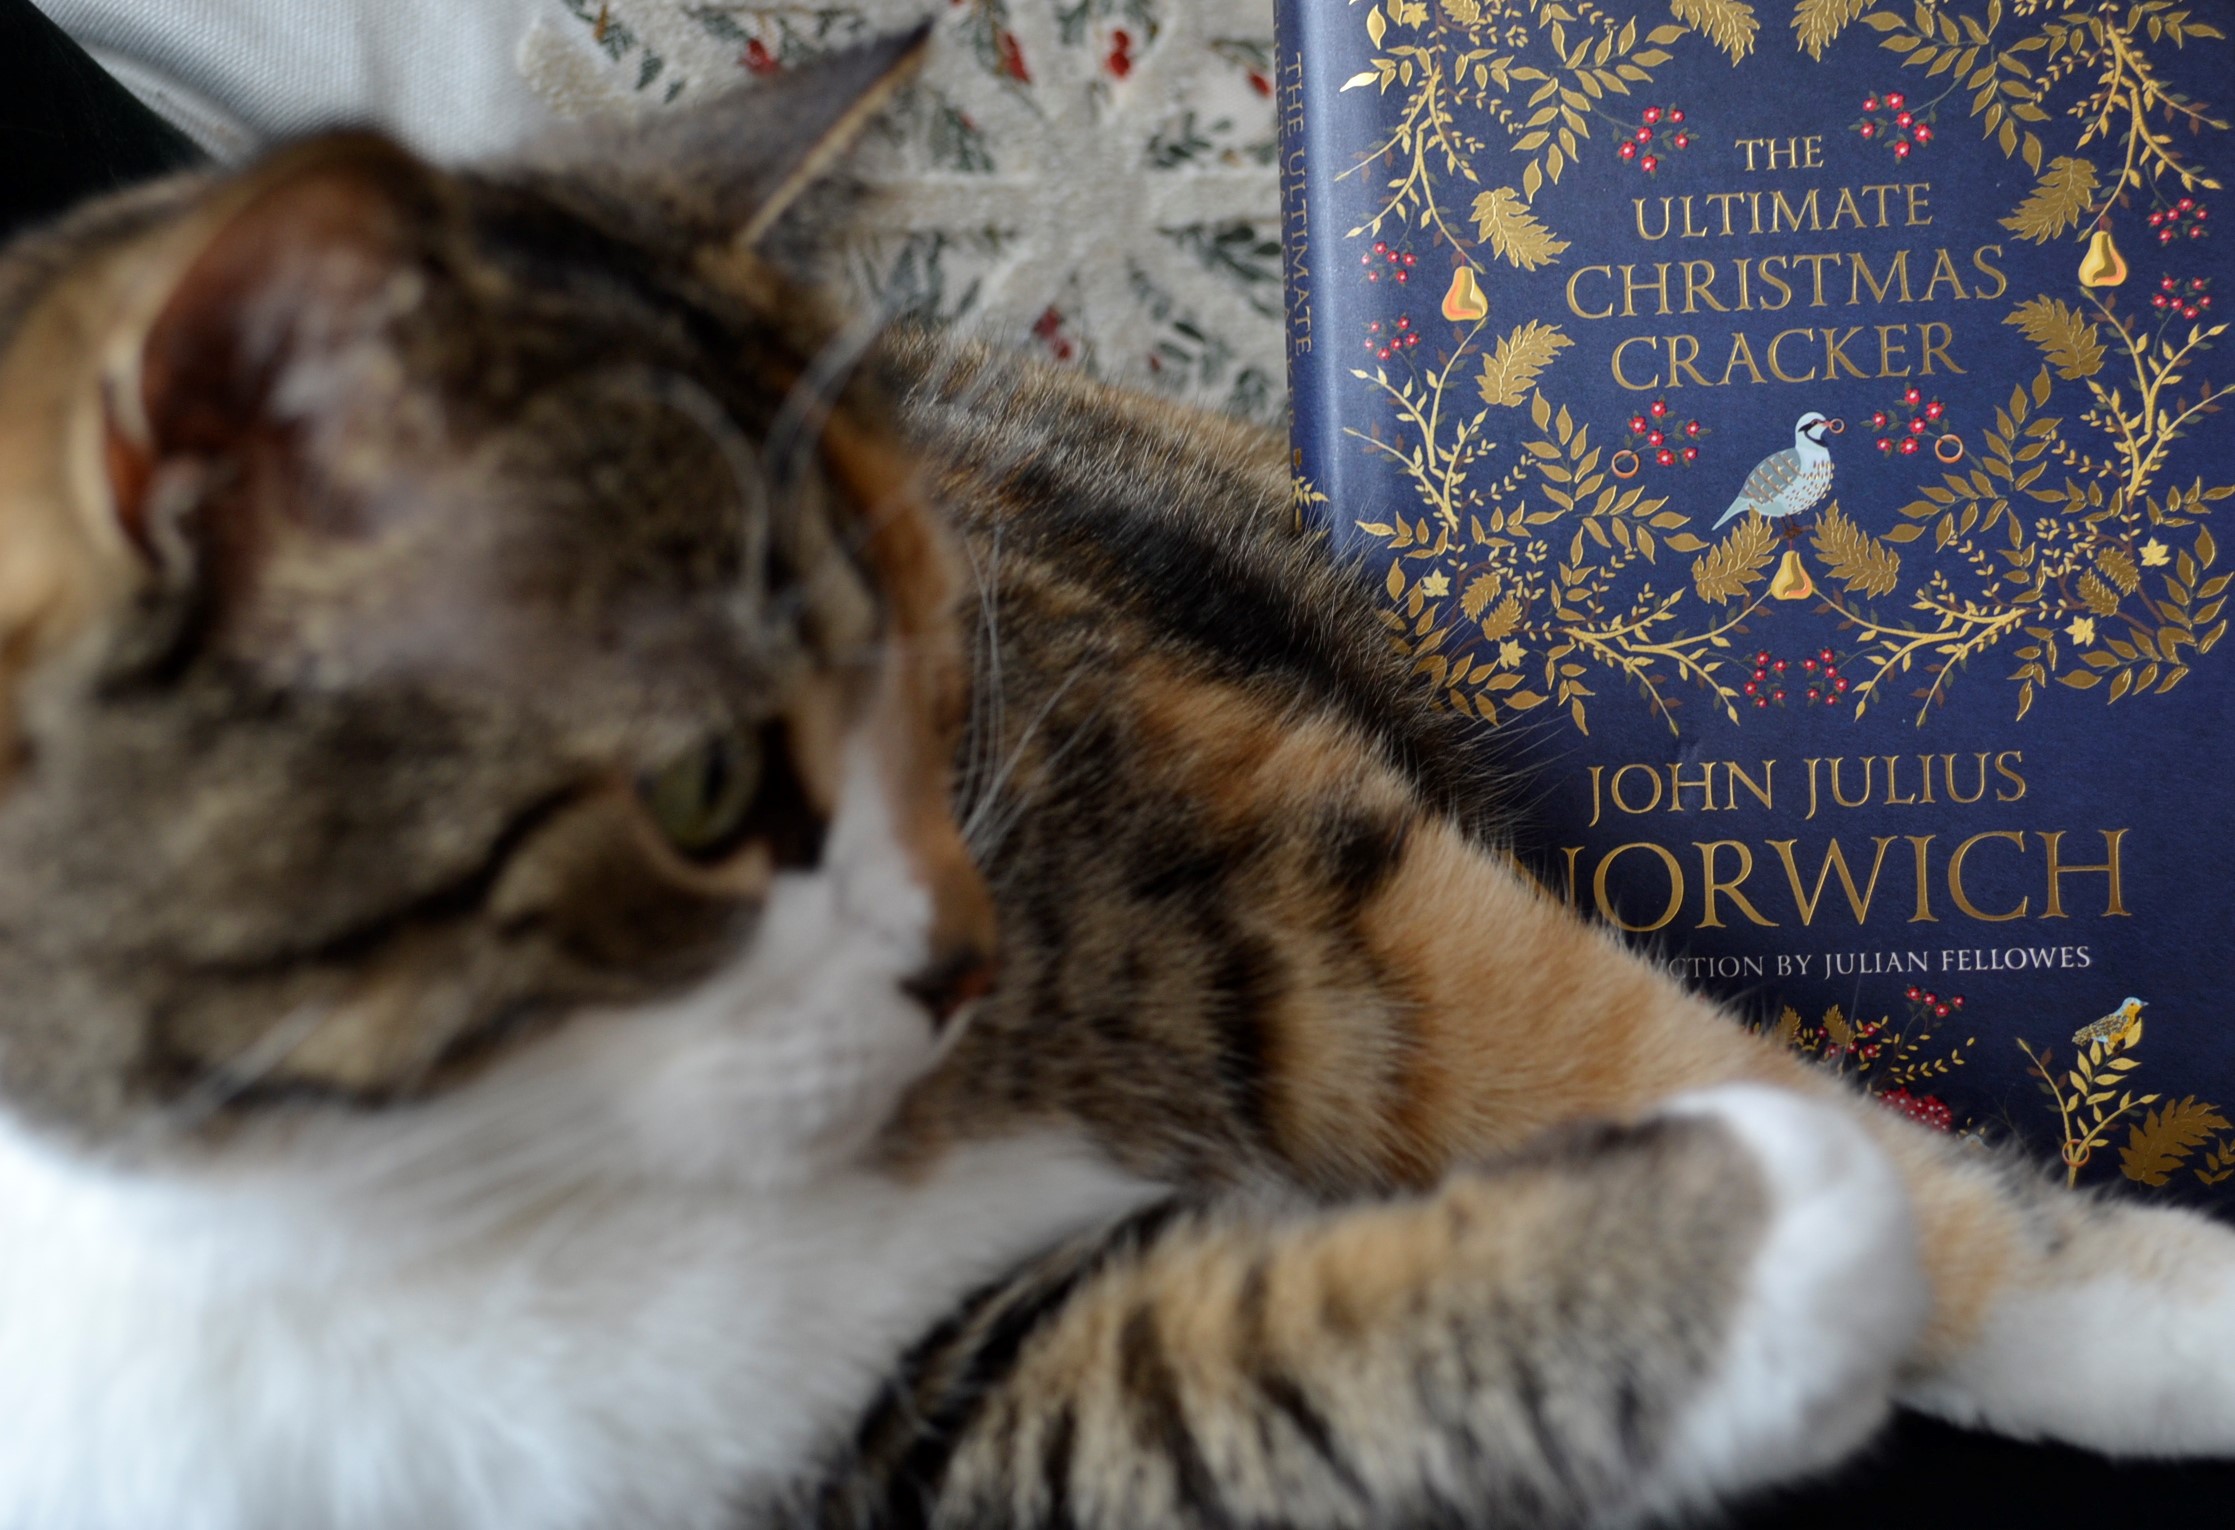 A blue book titled The Ultimate Christmas Cracker stands beside a tabby cat.